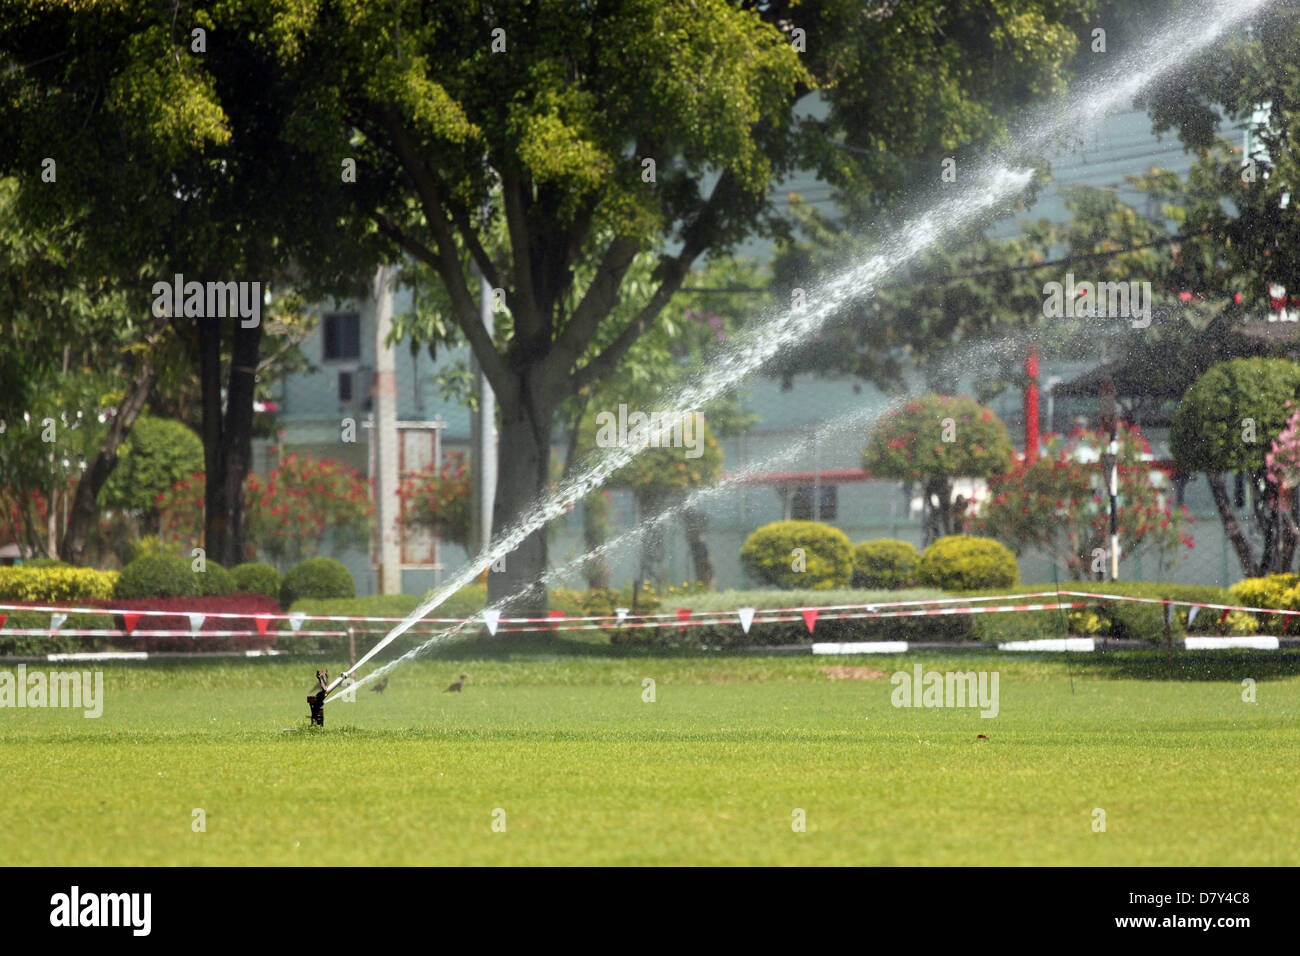 Sprinkler was in the lawn water injection. Stock Photo